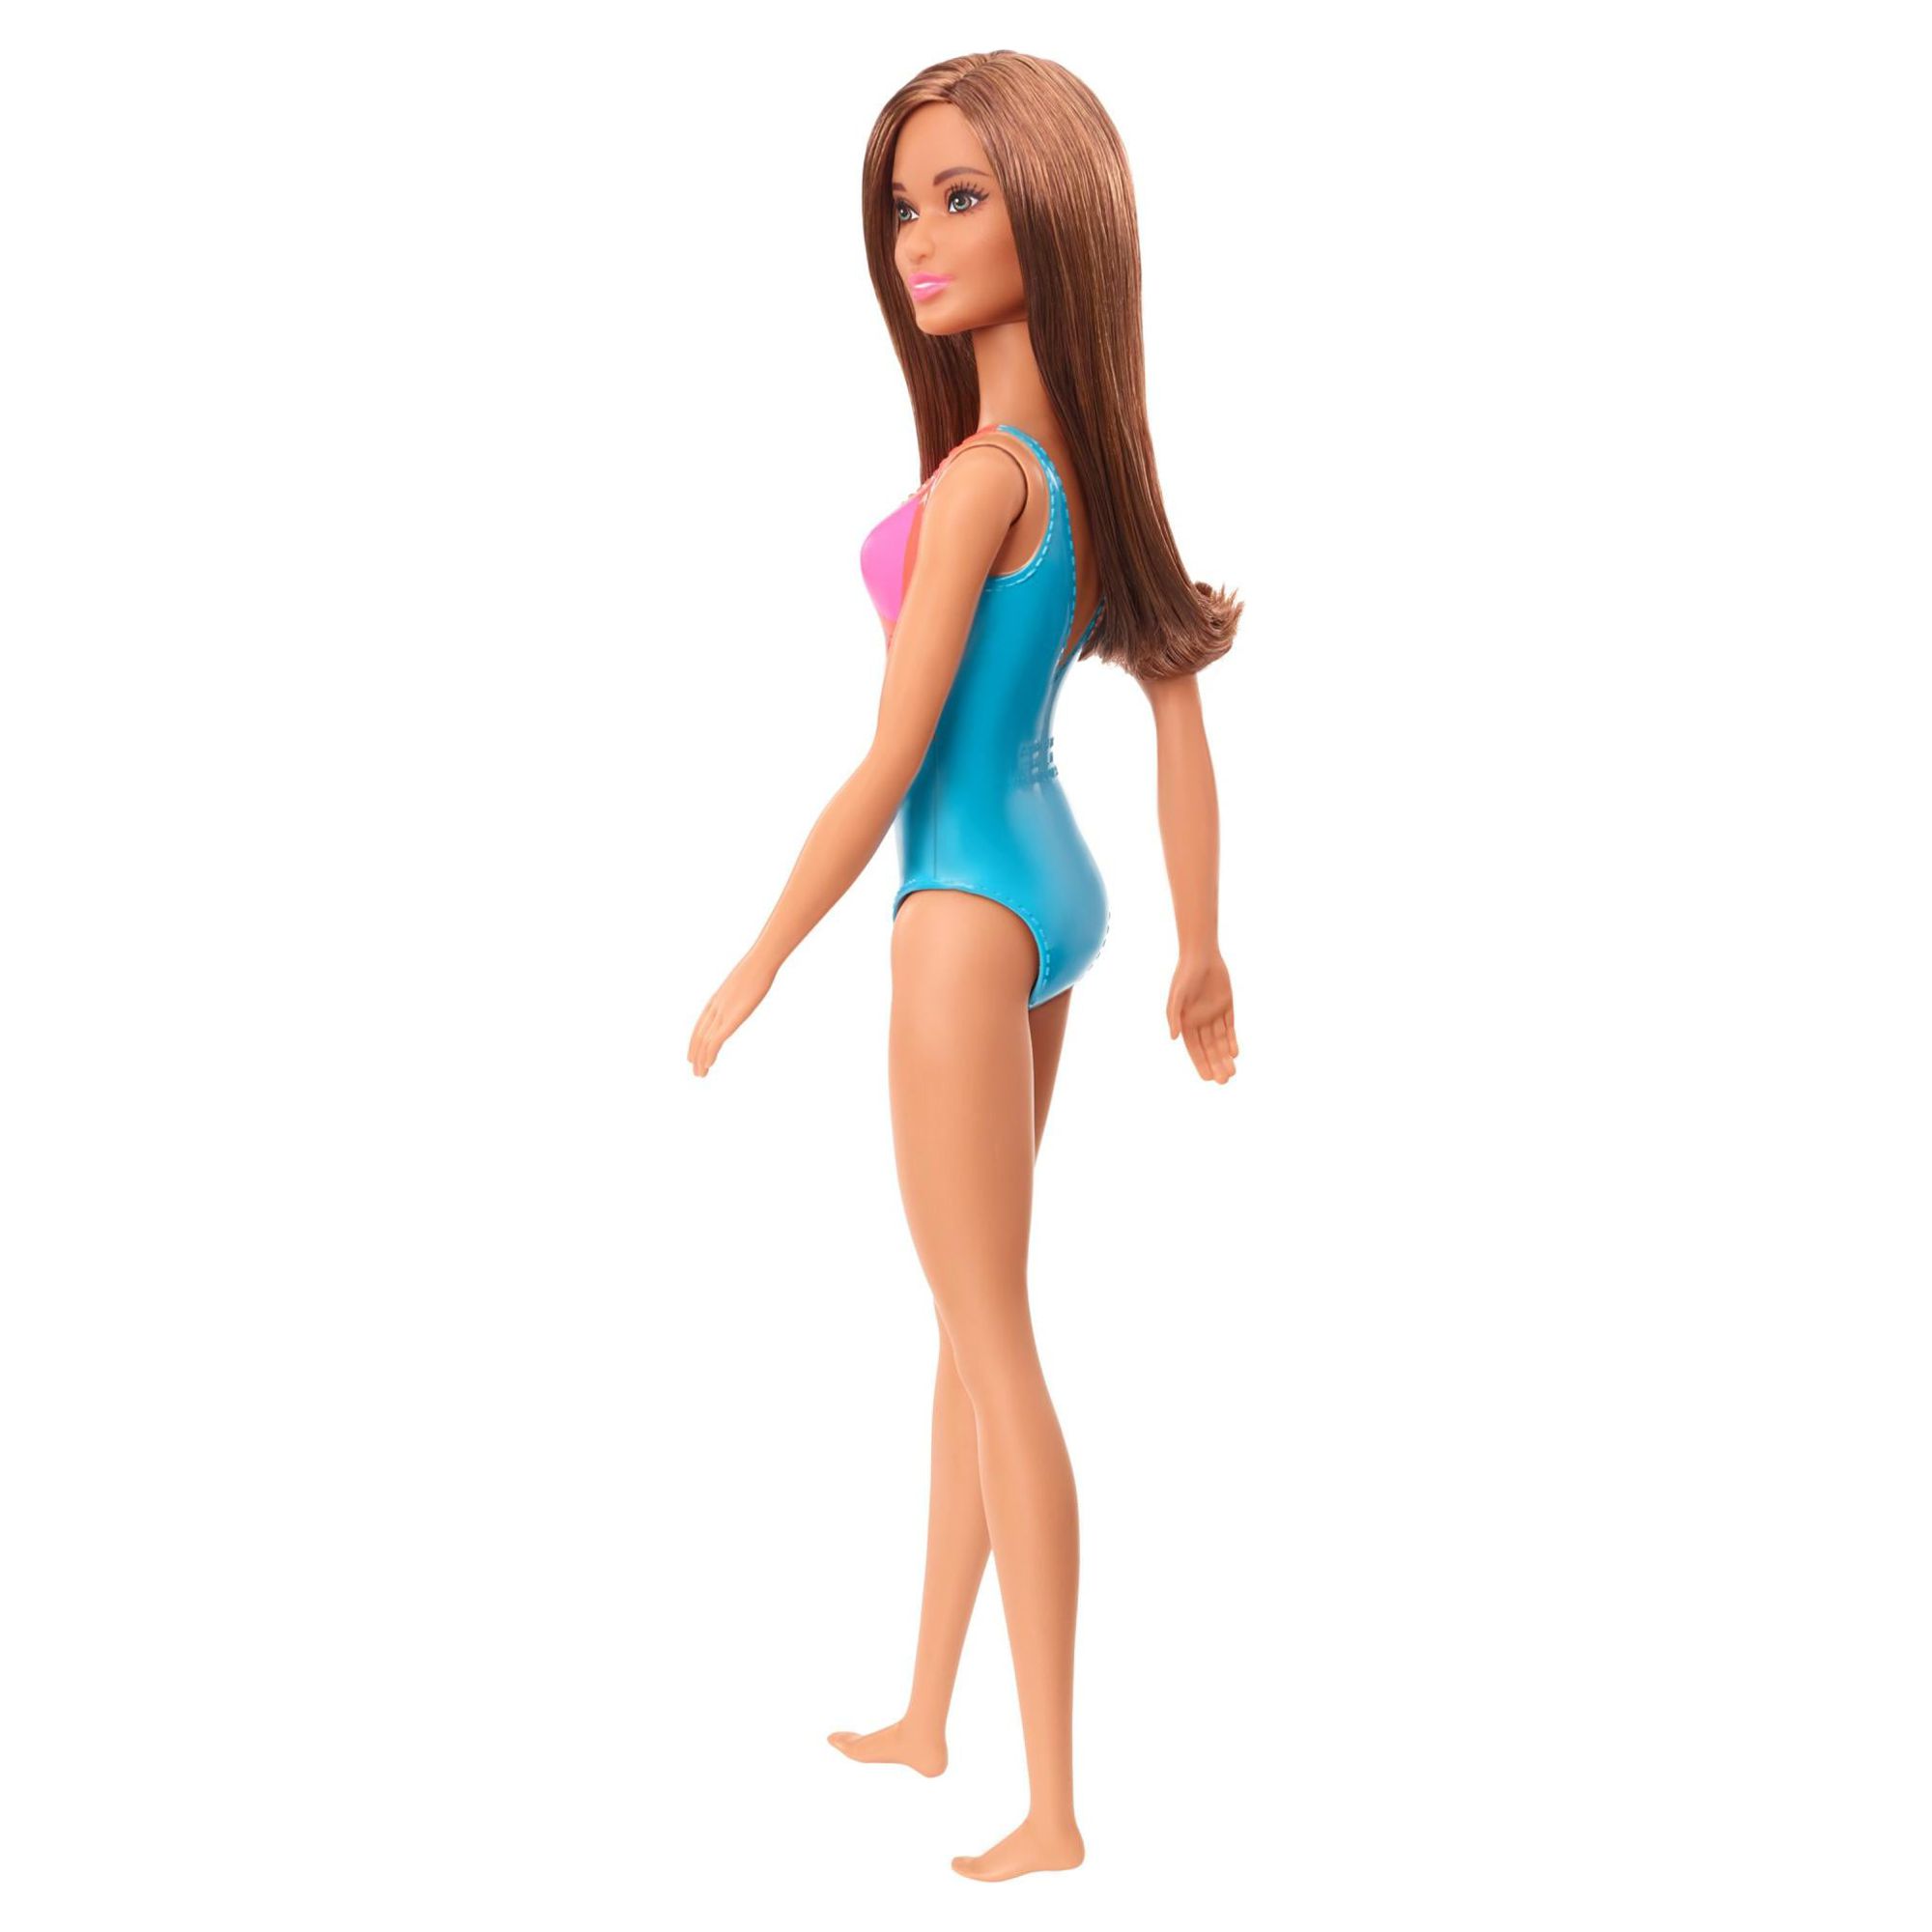 Barbie Doll, Brunette, Wearing Swimsuit, For Kids 3 To 7 Years Old, Brunette - image 4 of 6